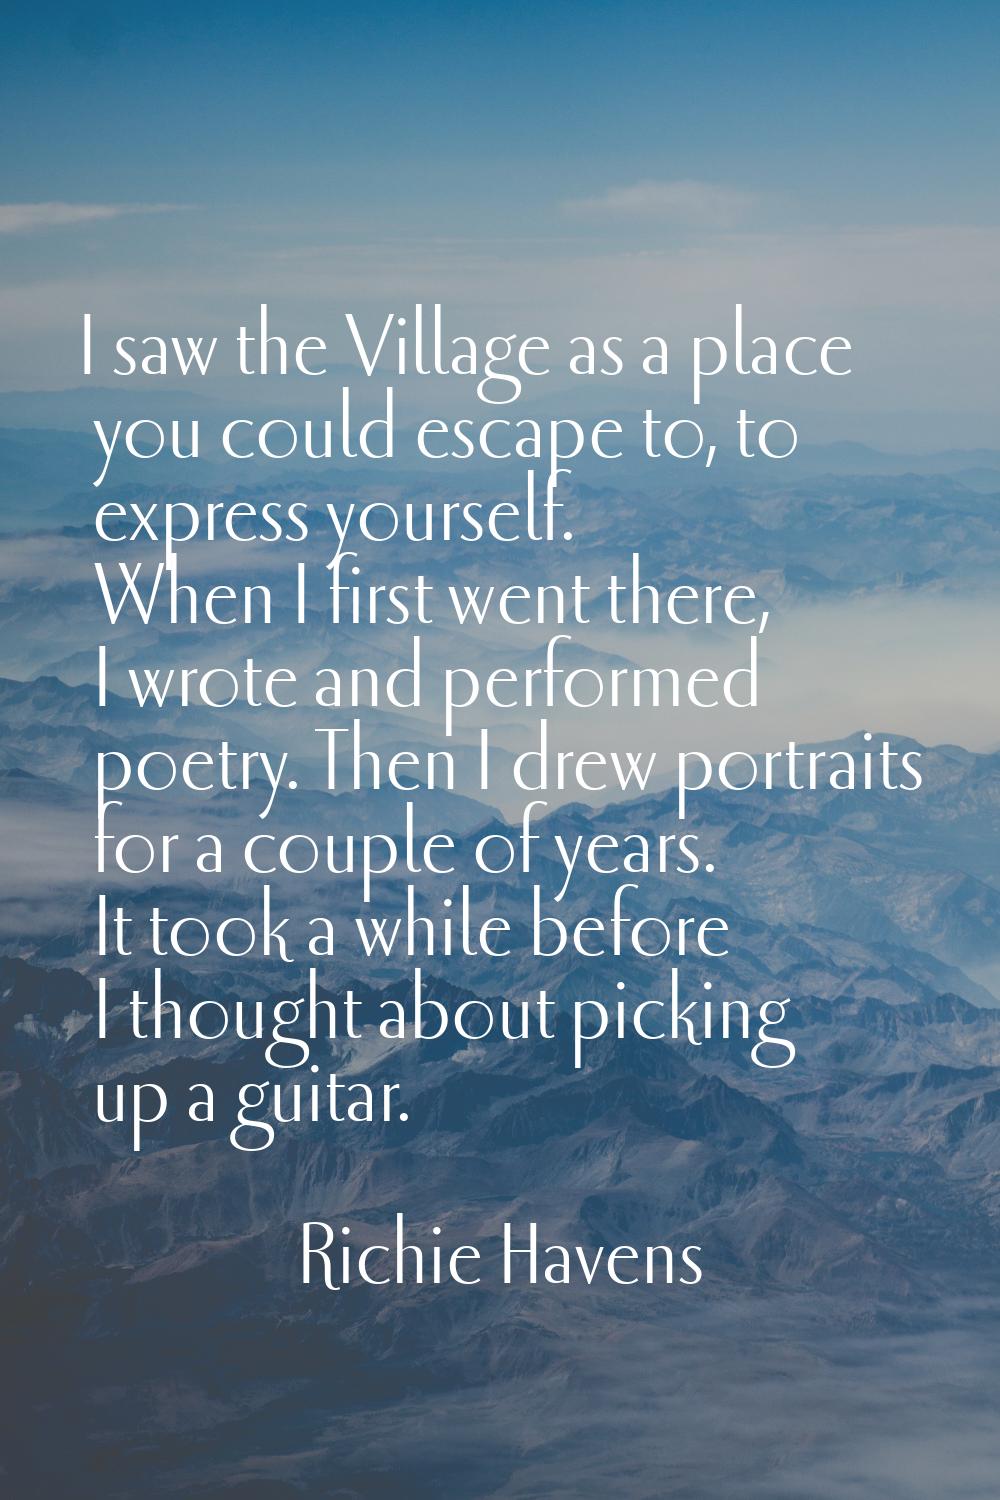 I saw the Village as a place you could escape to, to express yourself. When I first went there, I w